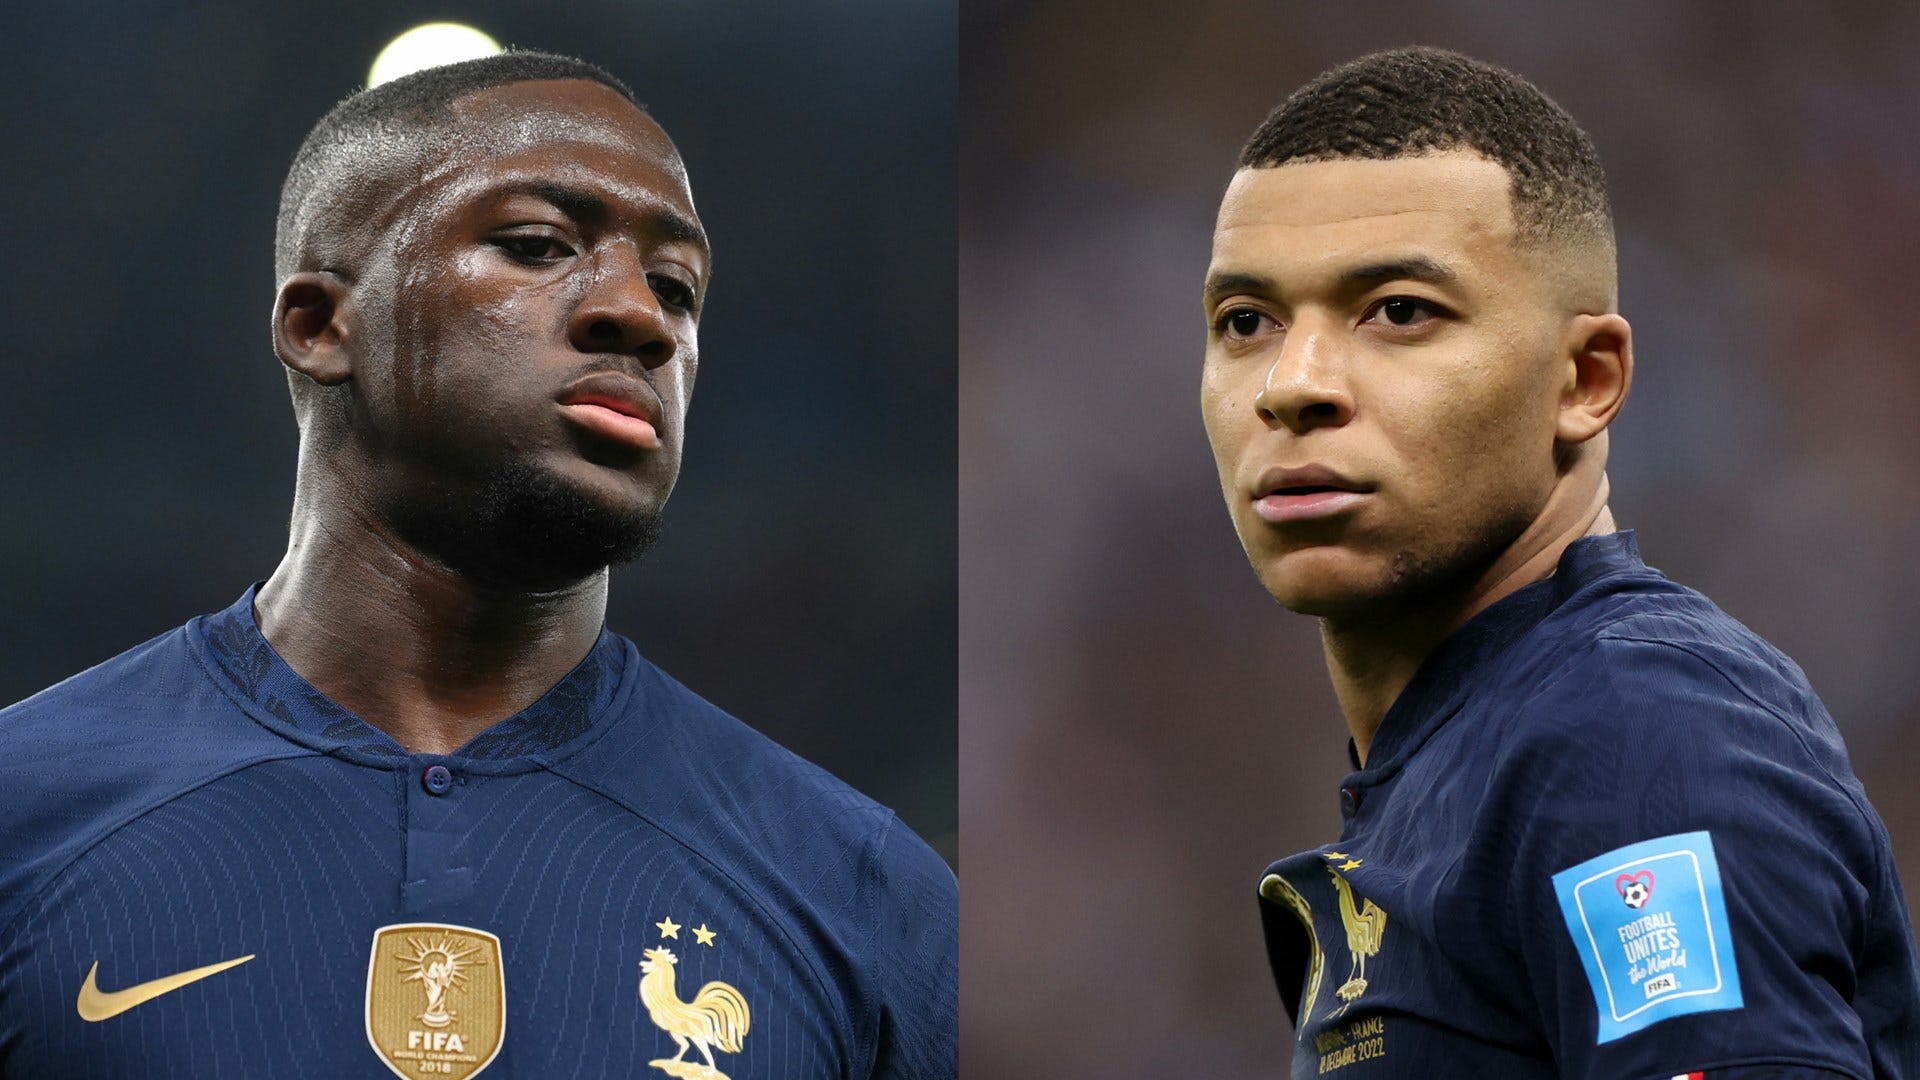 Are you crazy?!' - Kylian Mbappe's critics told they're dead wrong